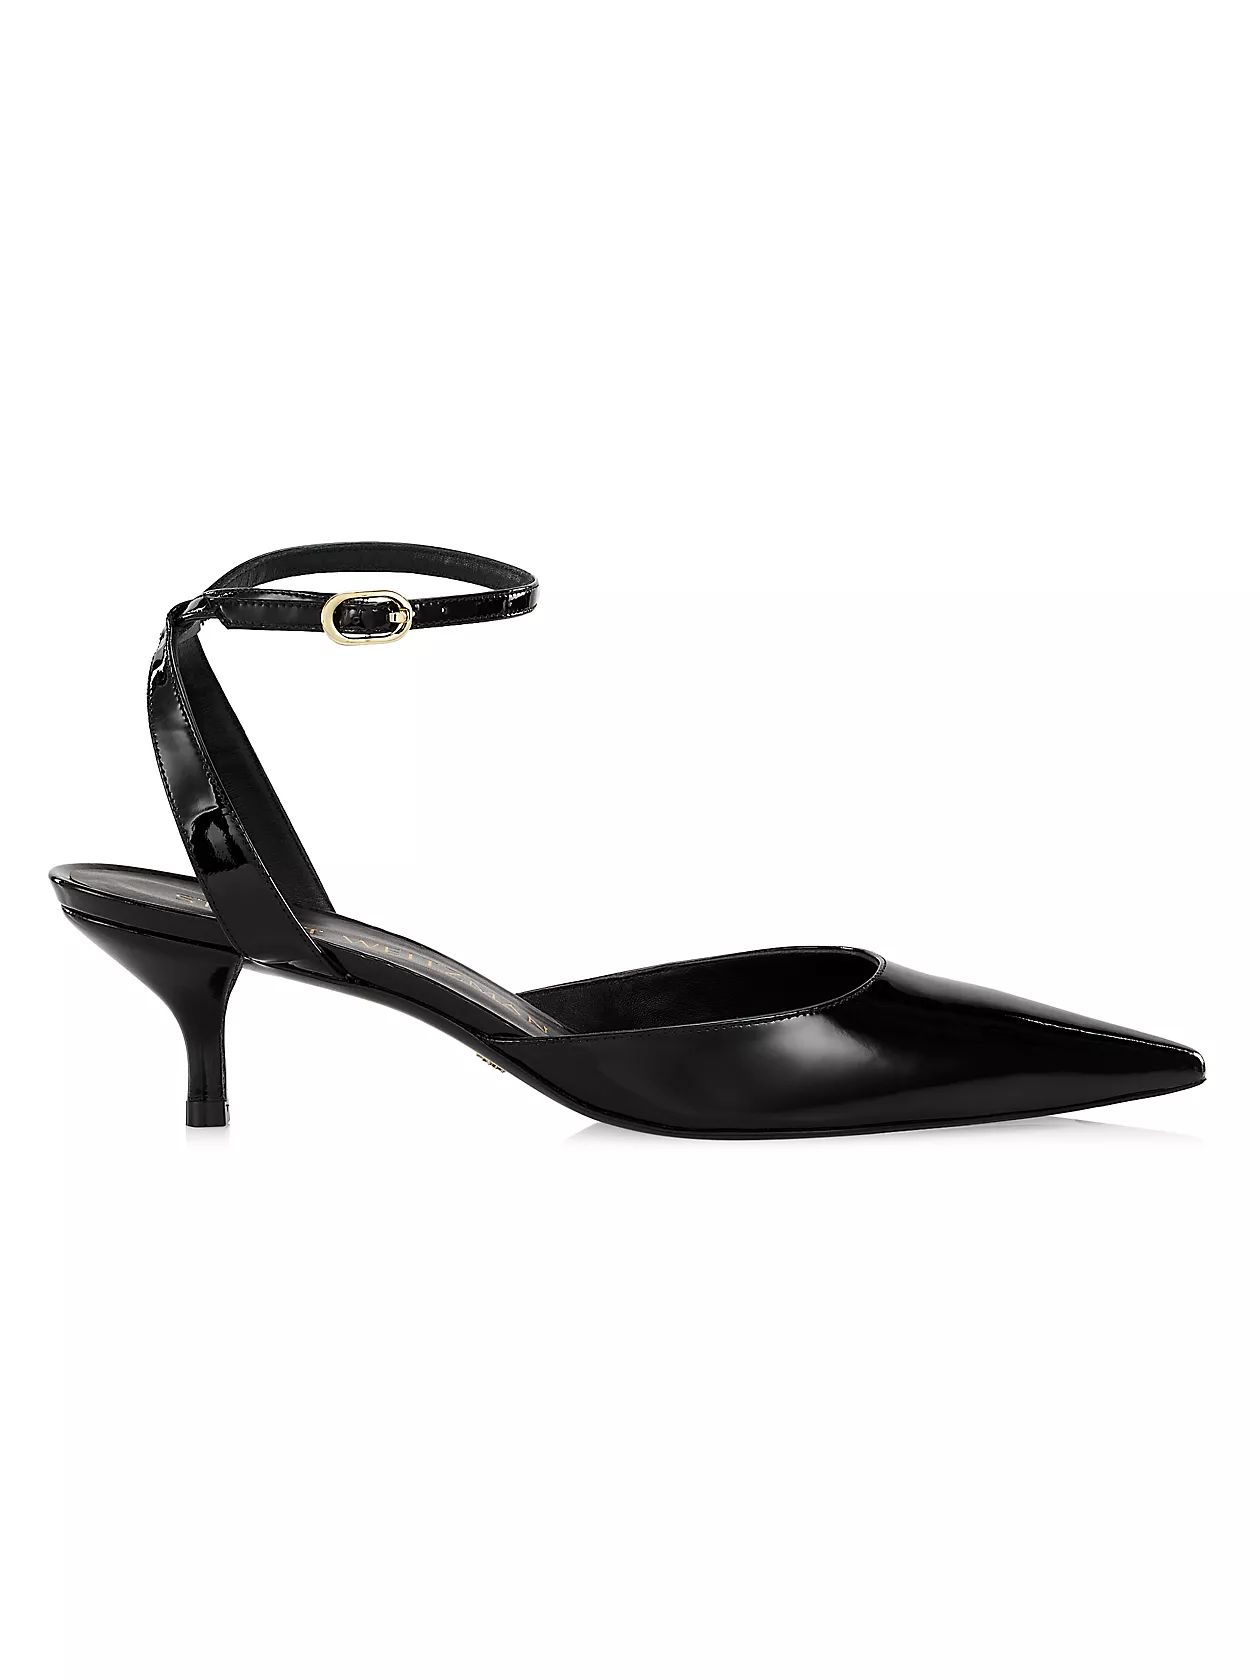 Barelythere 50MM Patent Leather Kitten Heel Pumps | Saks Fifth Avenue